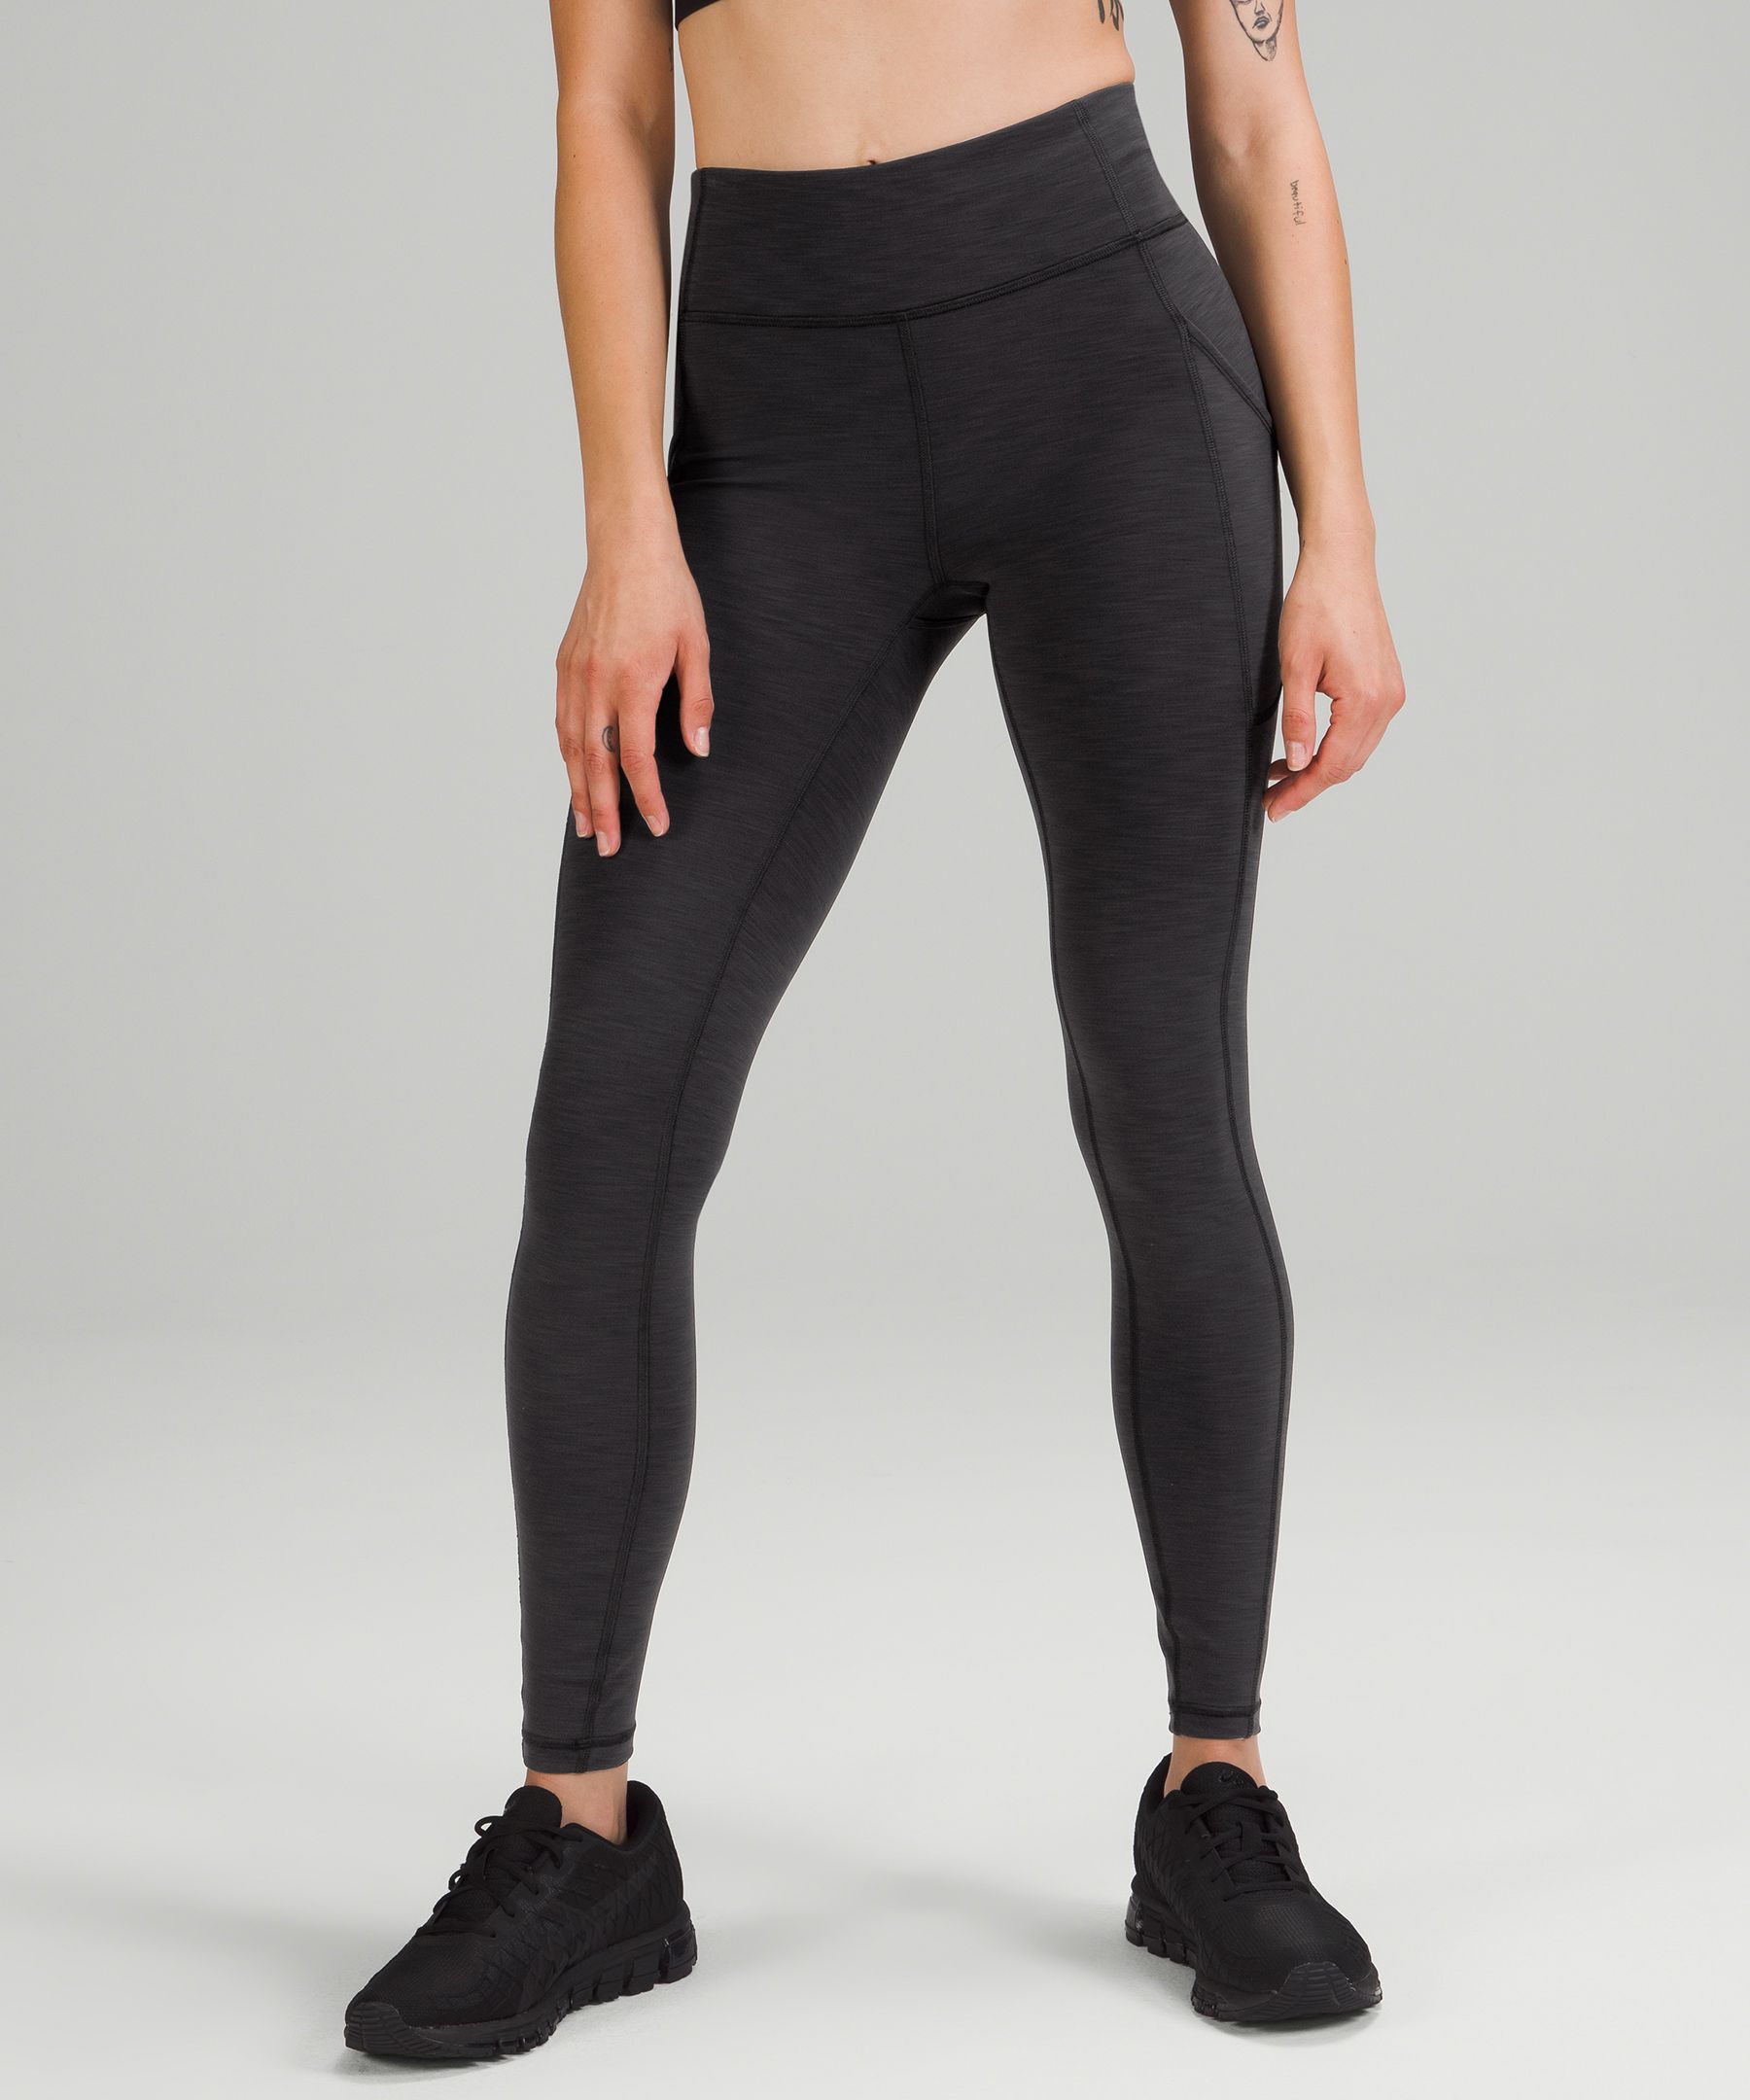 Lululemon's We Made Too Much: Top-rated Invigorate leggings are